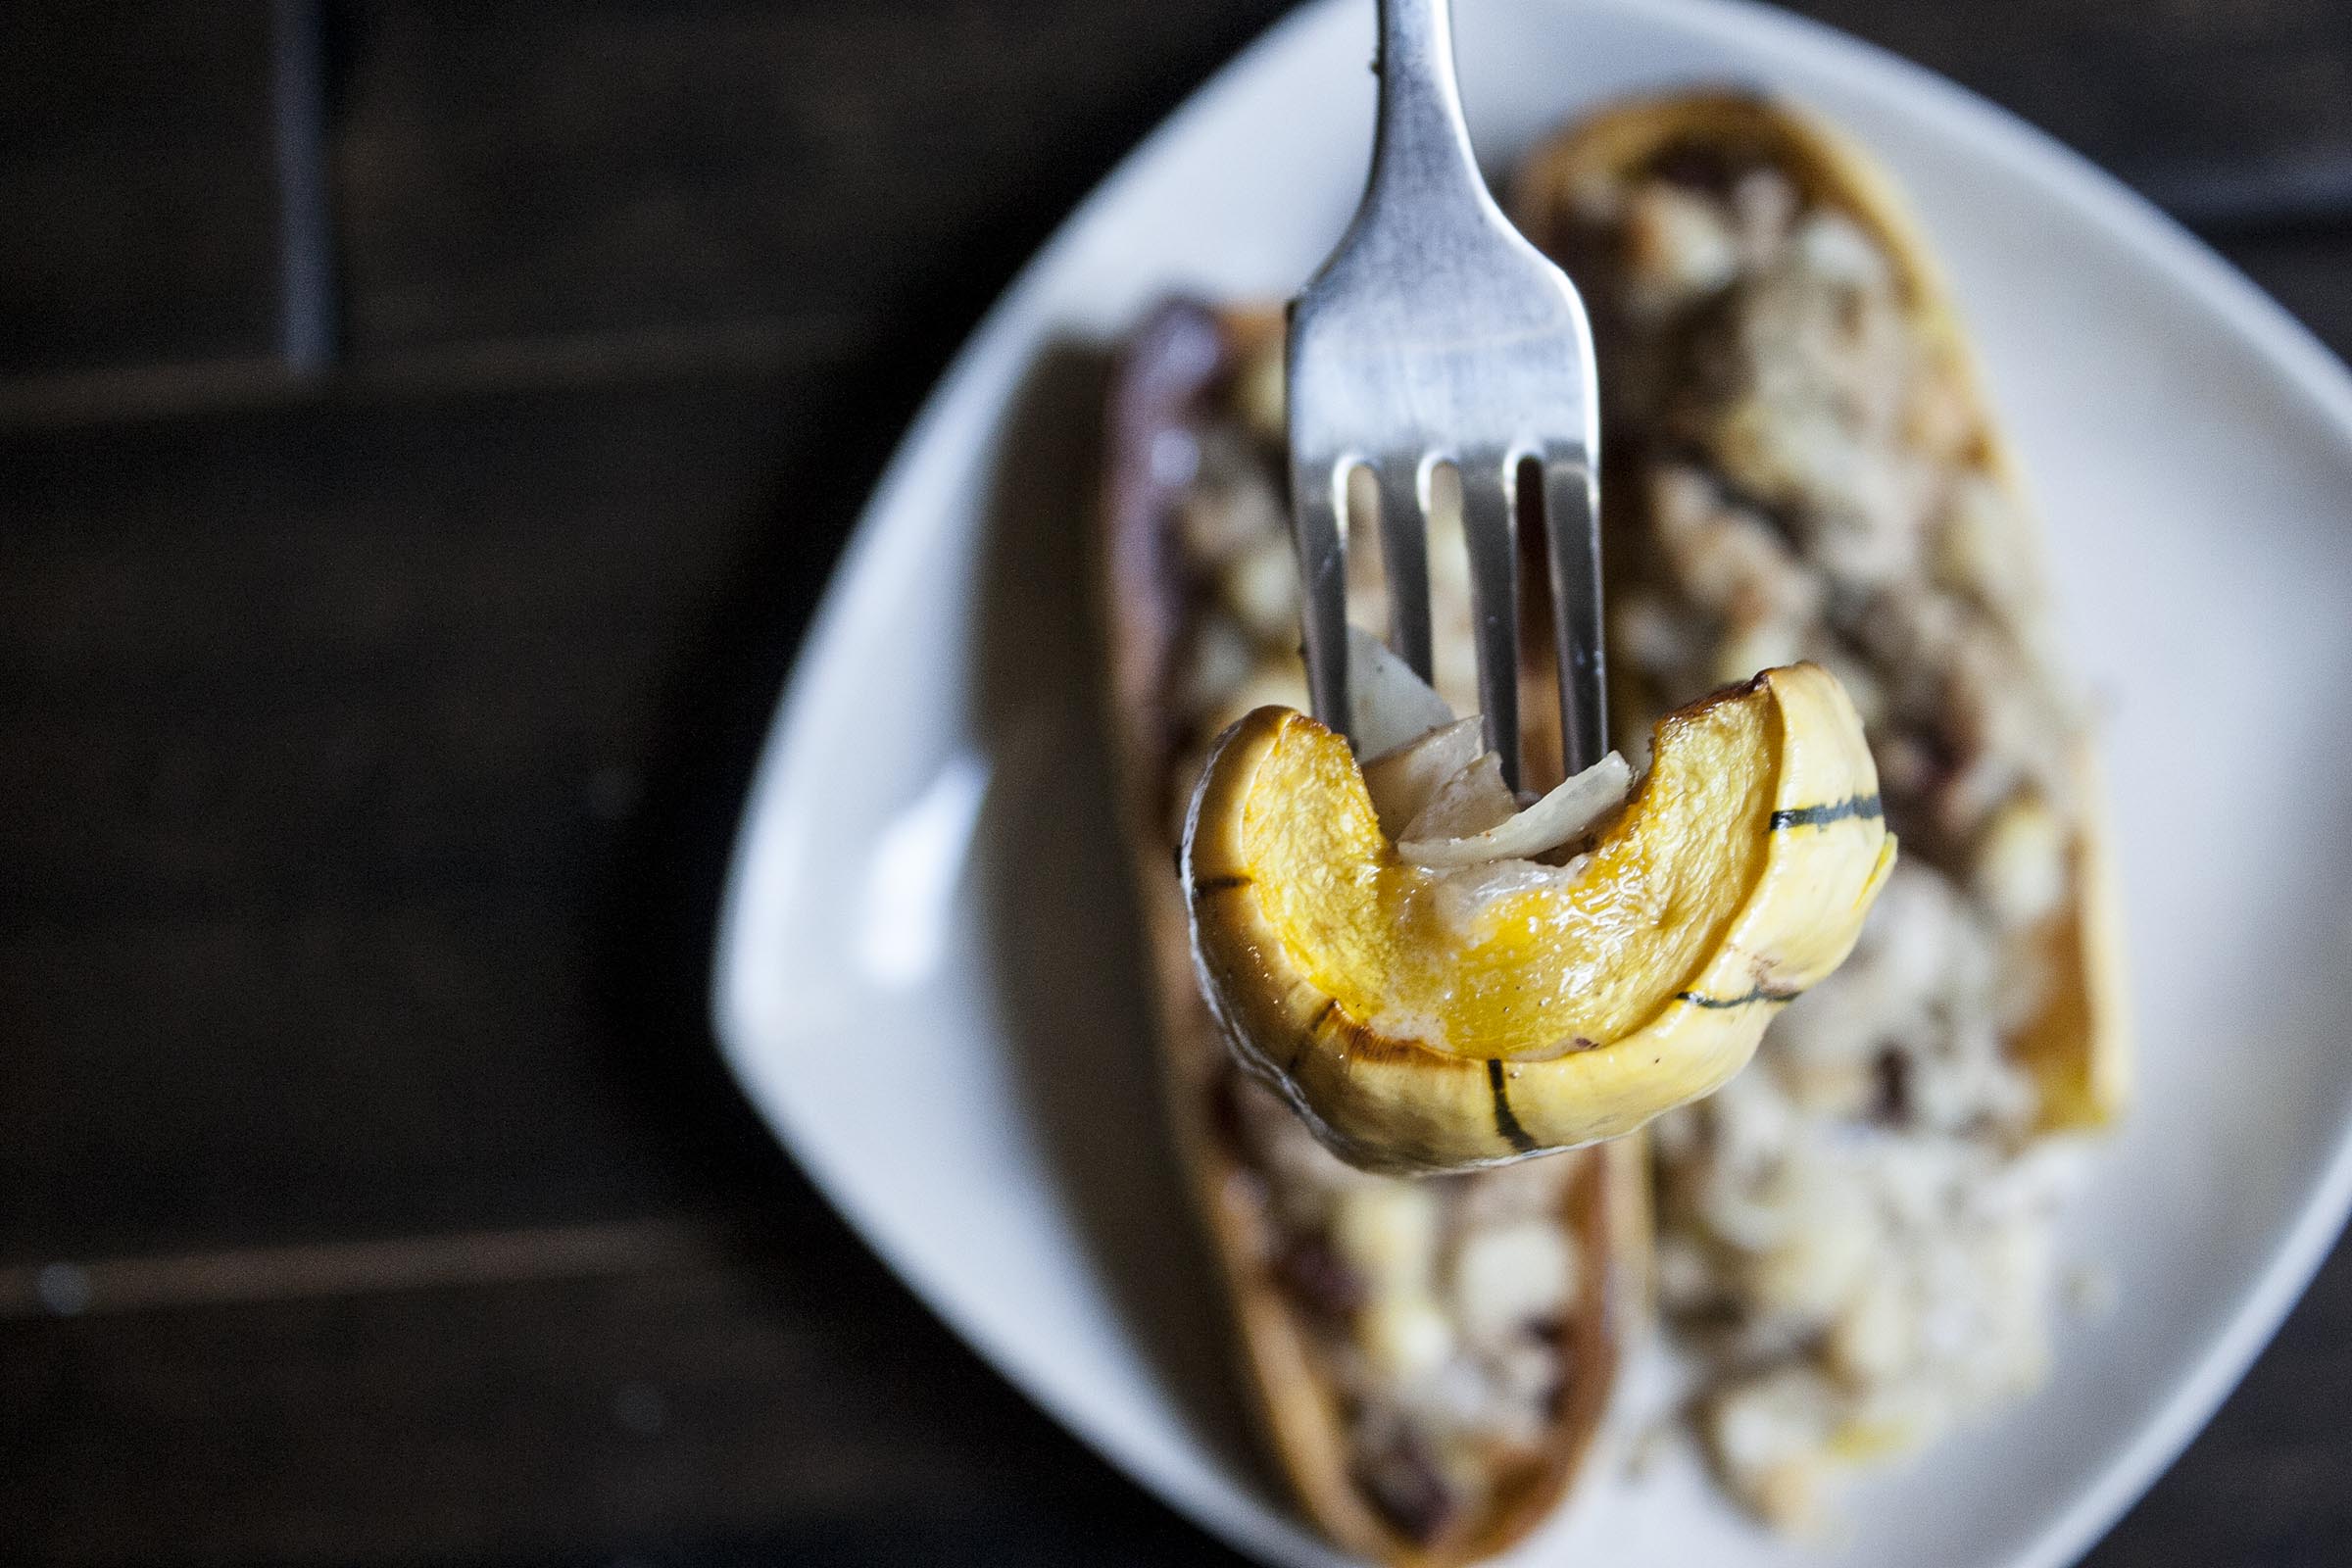 This is a slice of stuffed delicata squash.